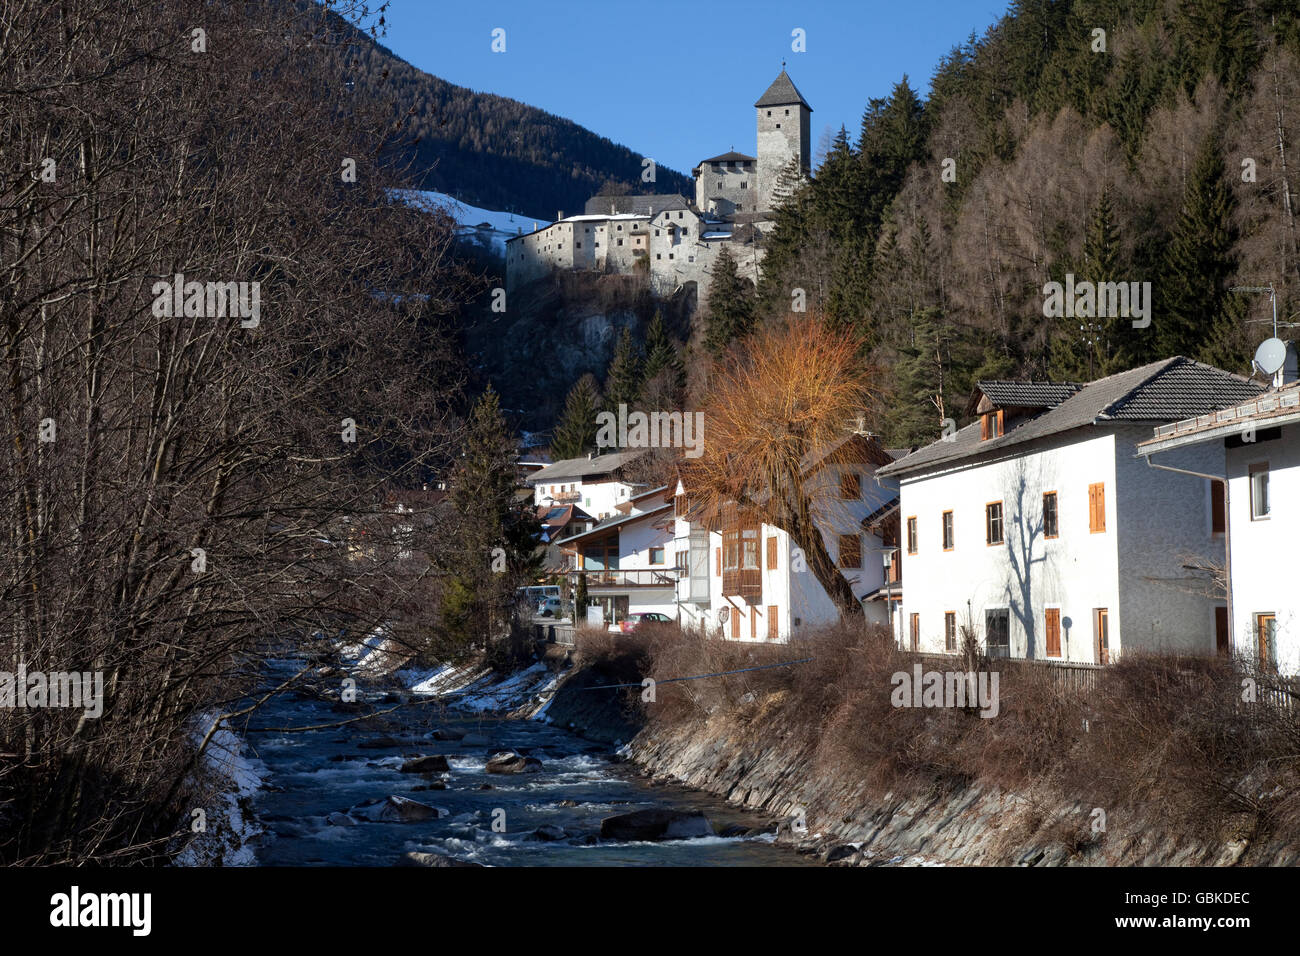 Castle Tures above Sand in Taufers, Campo Tures, Tauferer Tal valley, Valli di Tures, Alto Adige, Italy, Europe Stock Photo